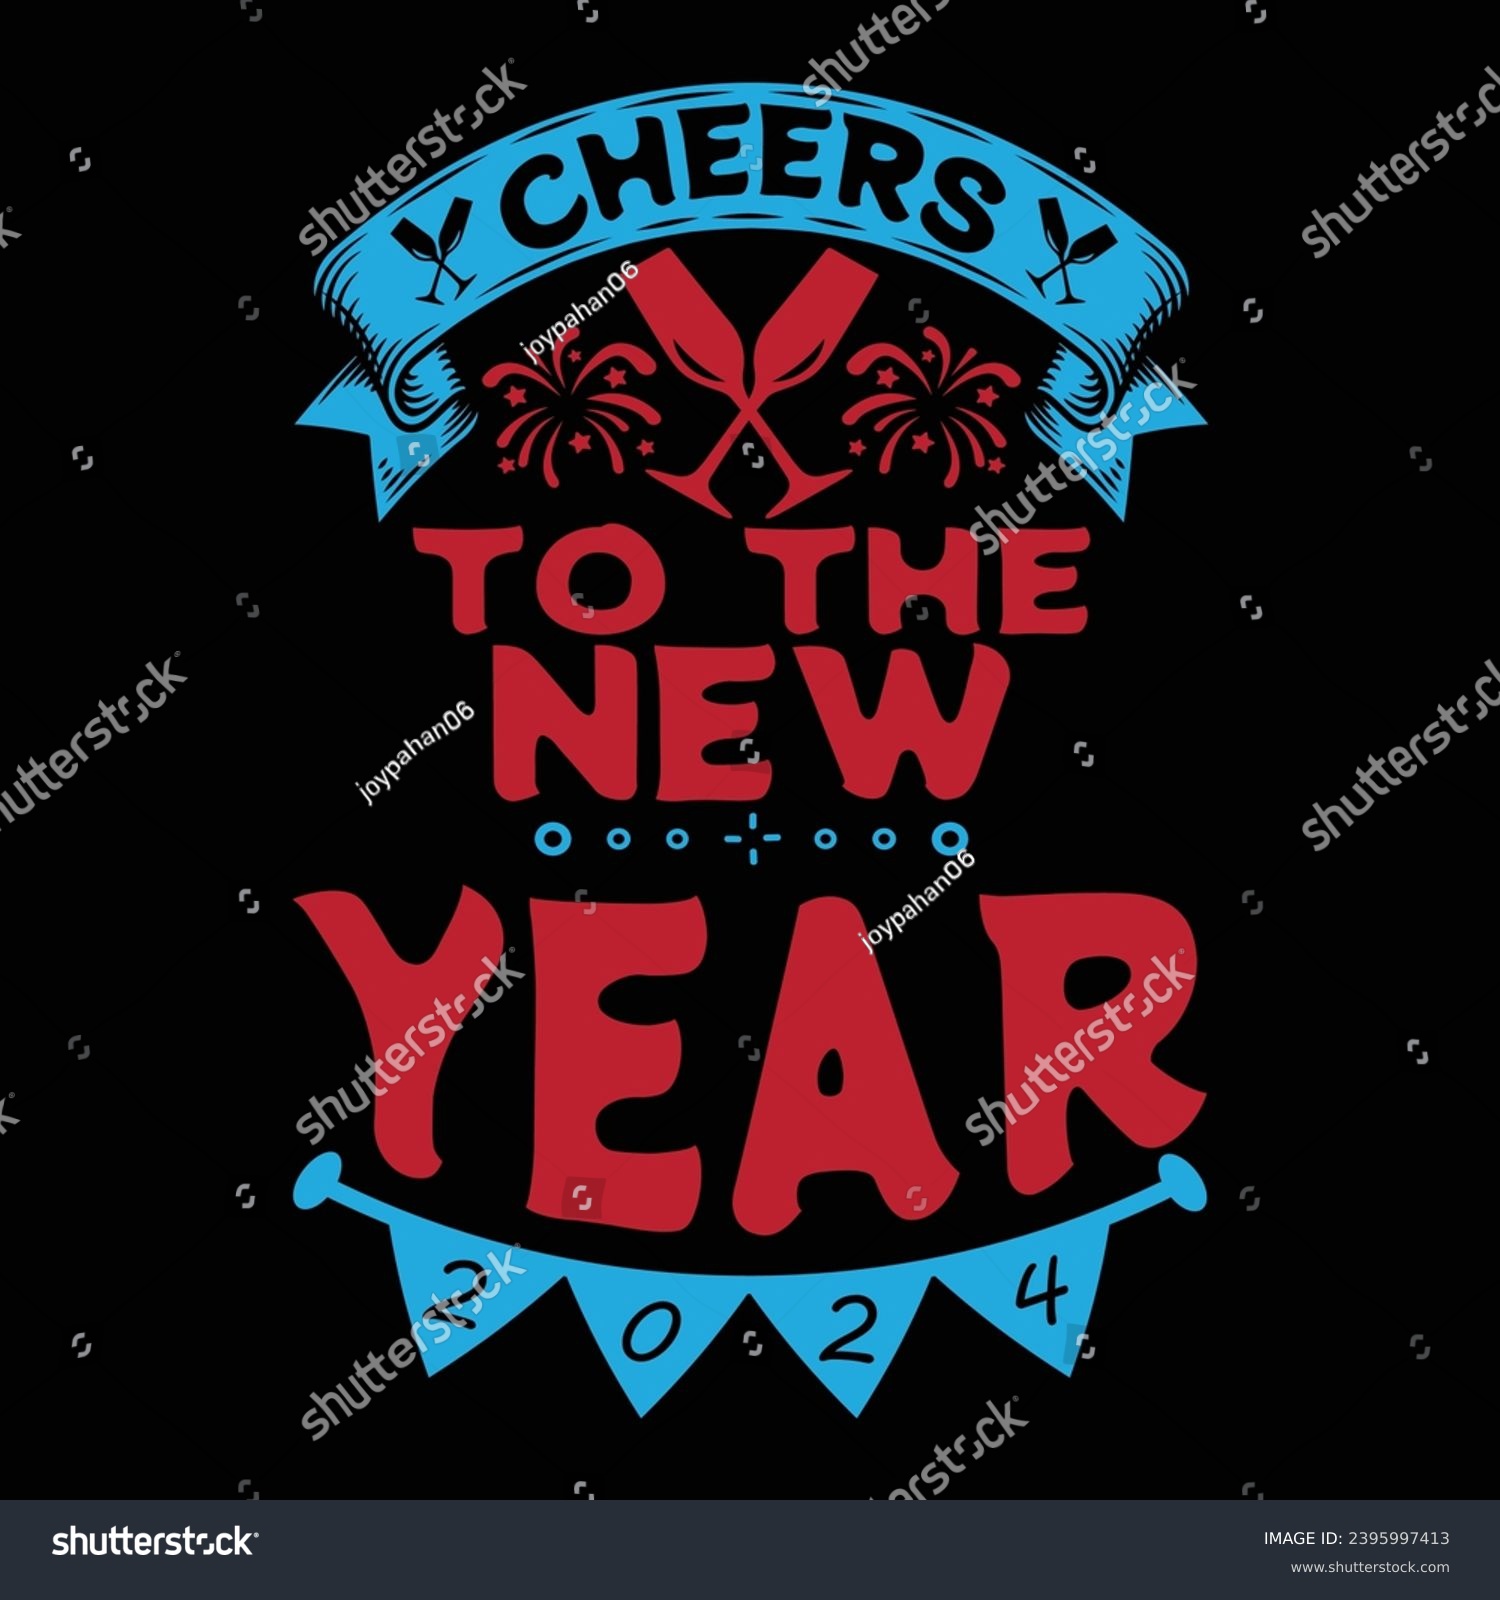 SVG of cheers to the new year illustrations with patches for t-shirts and other uses svg